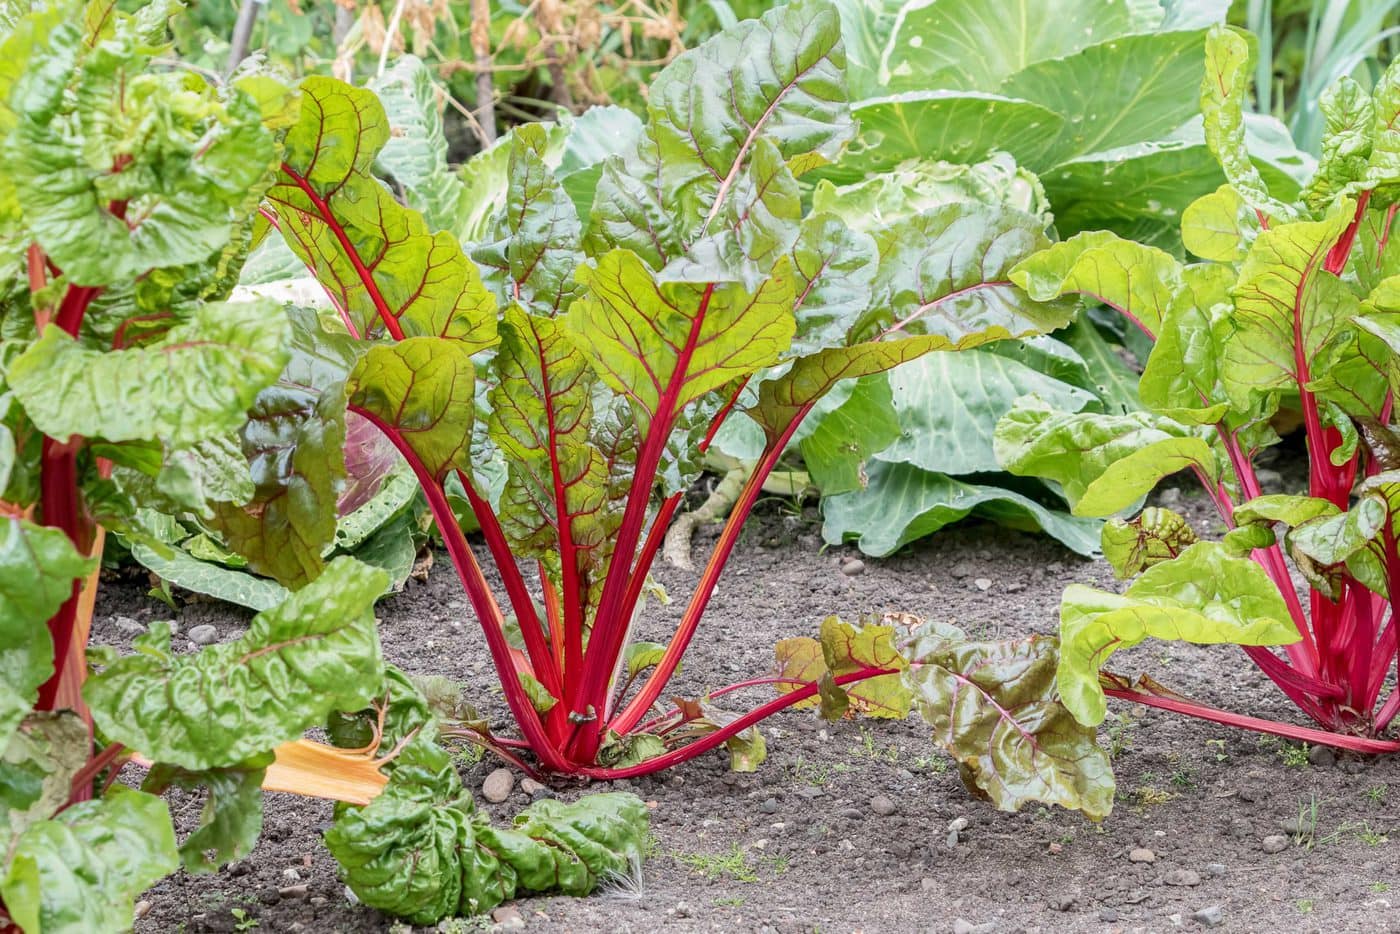 Rhubarb plant growing in the garden.